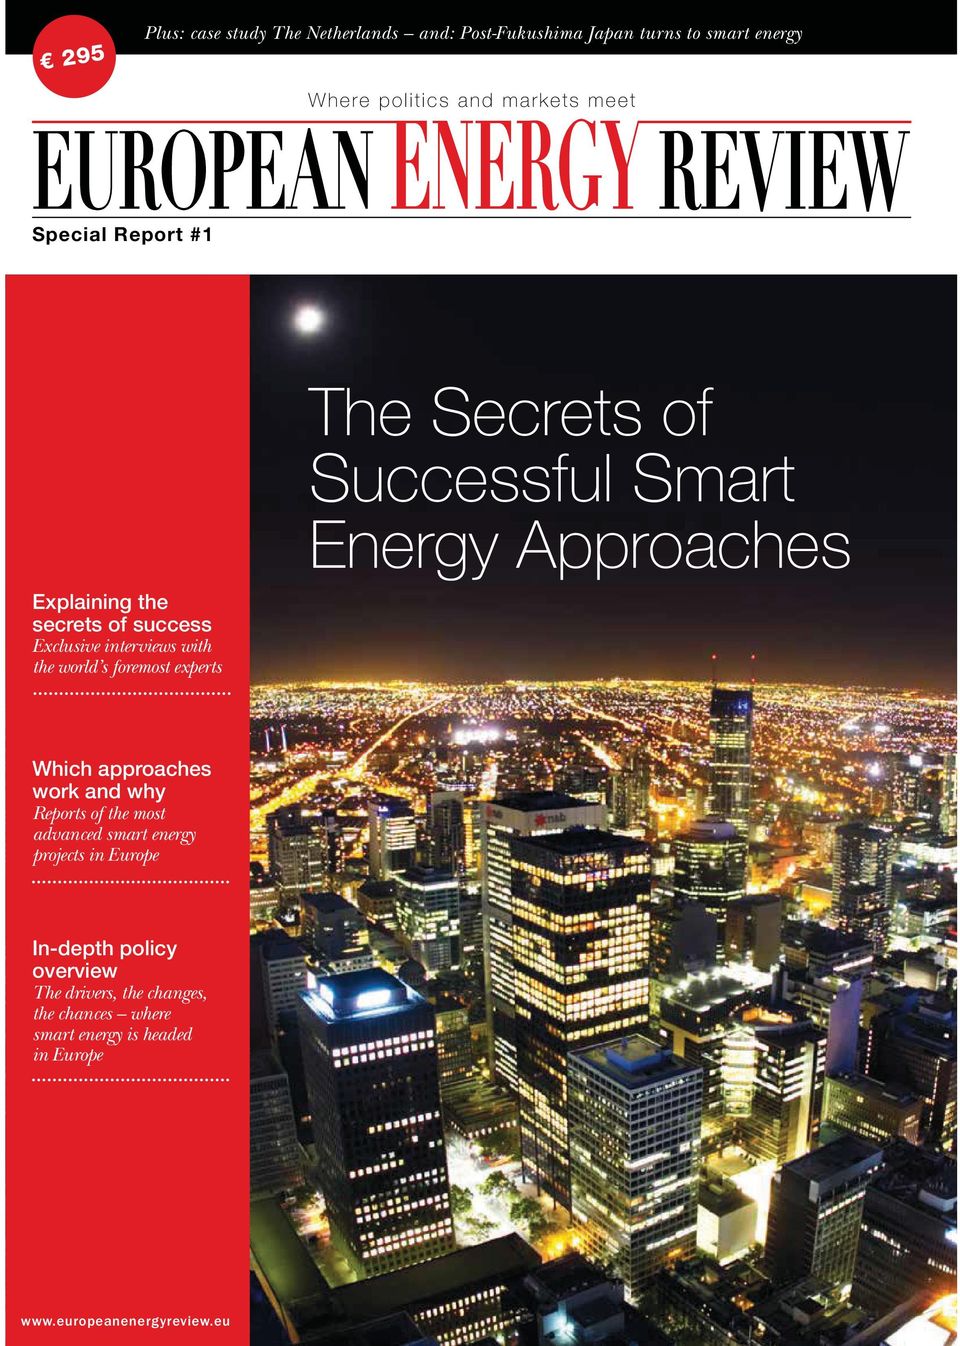 Smart Energy Approaches Which approaches work and why Reports of the most advanced smart energy projects in Europe